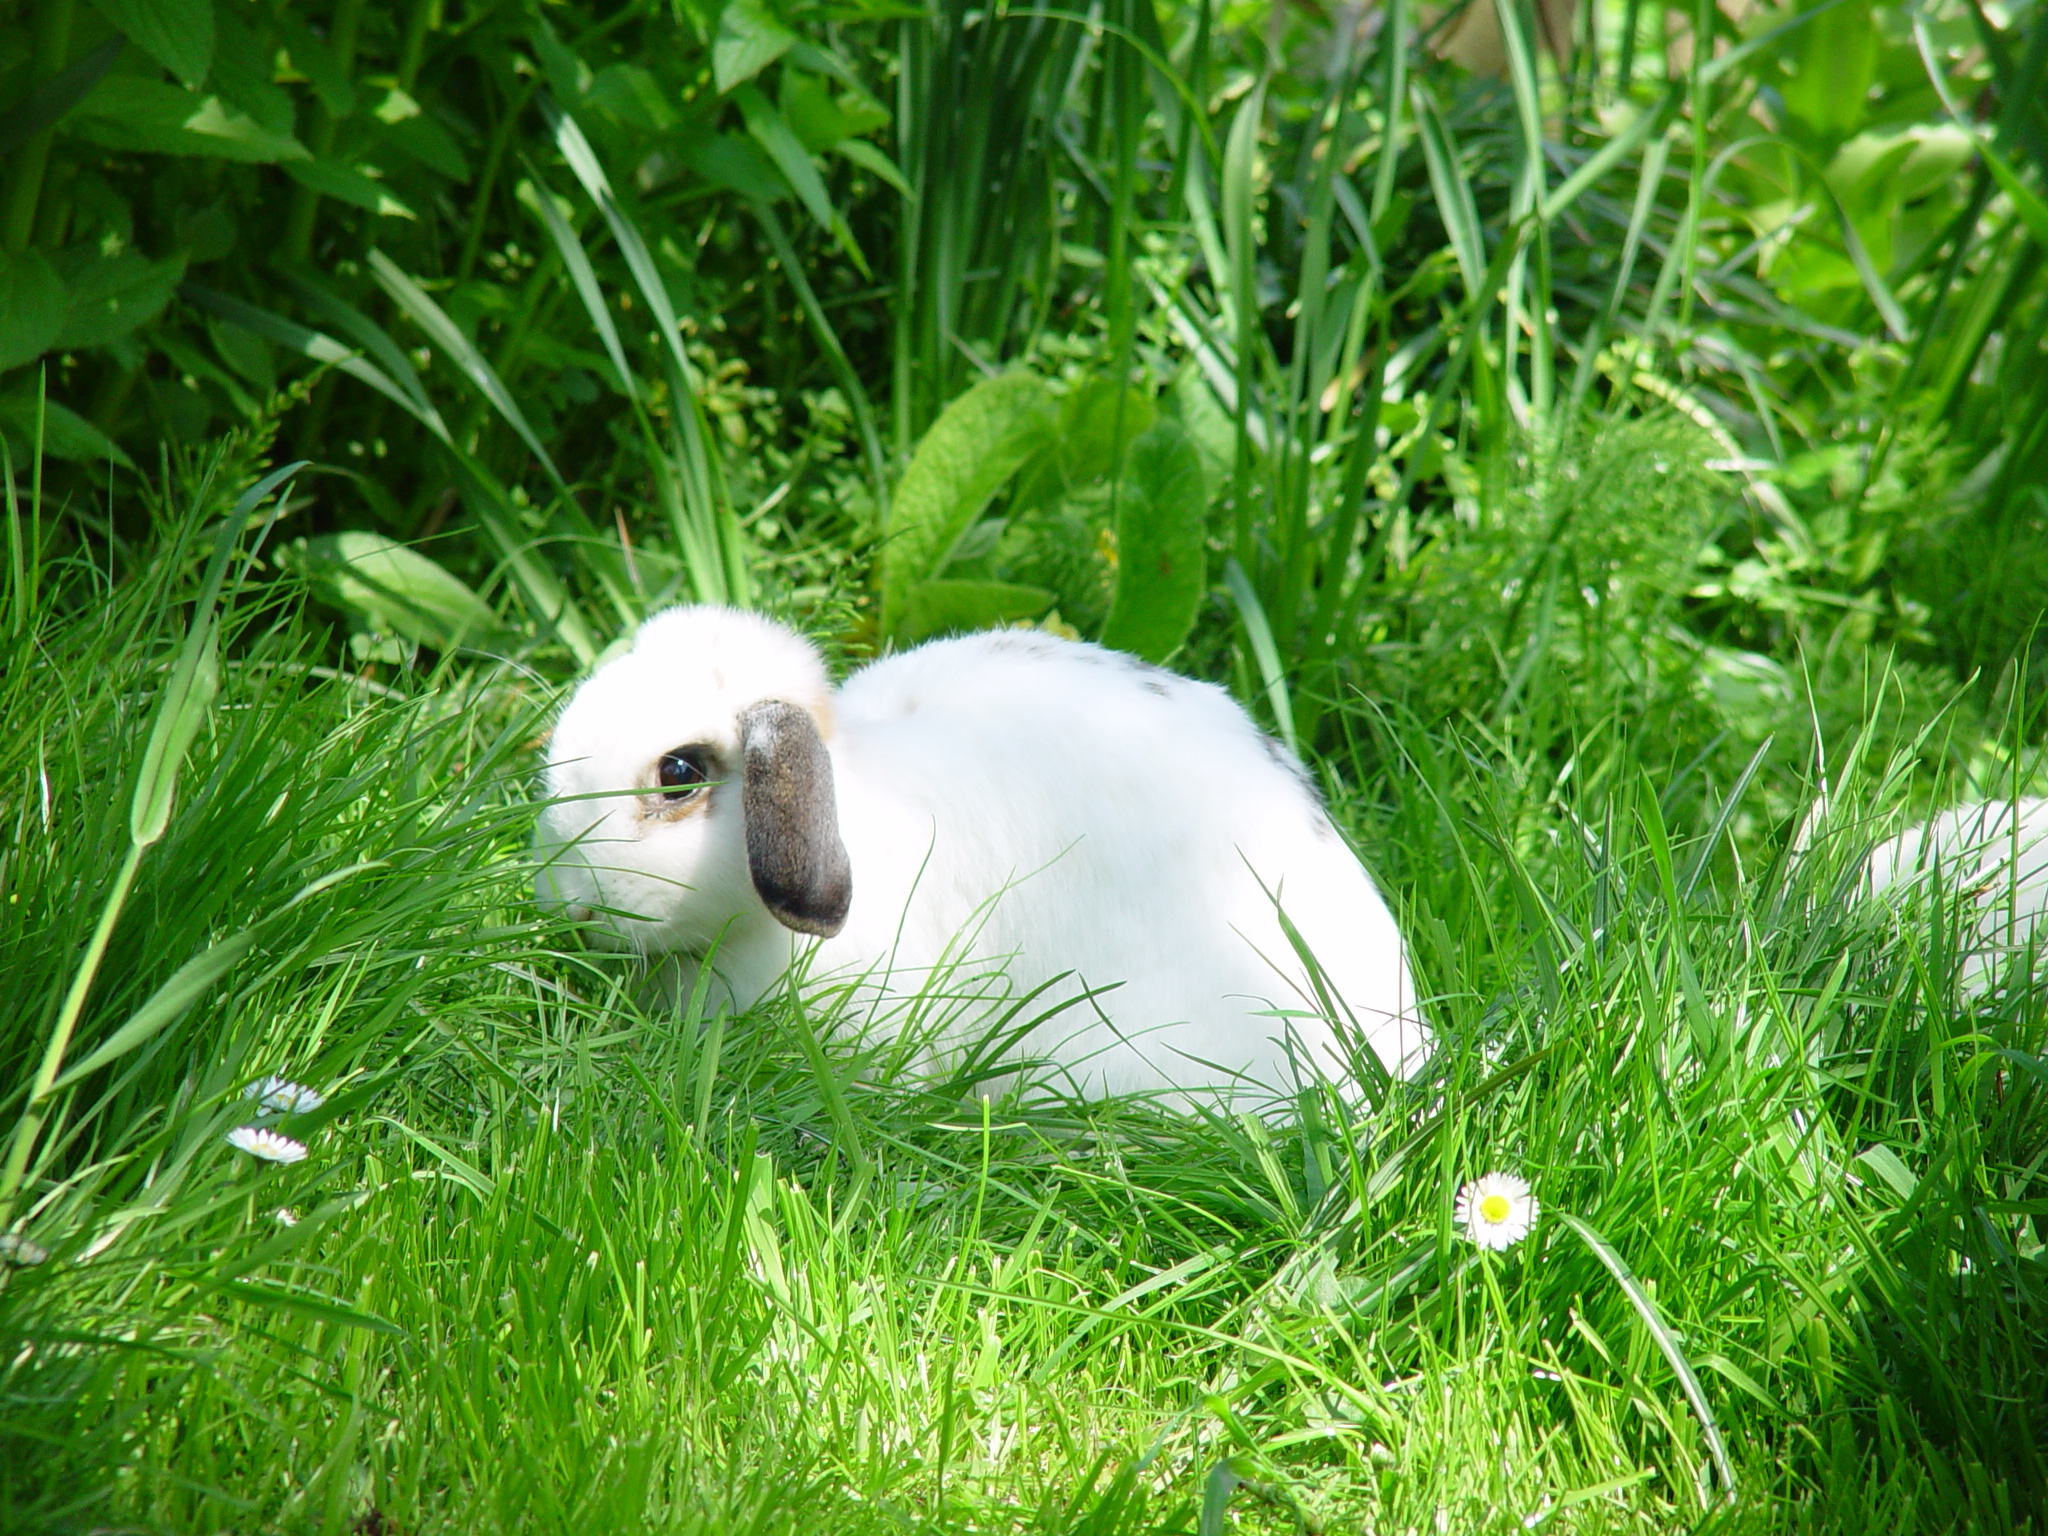 Adventurous Bunnies Explore the Lawn and Tall Grasses 2